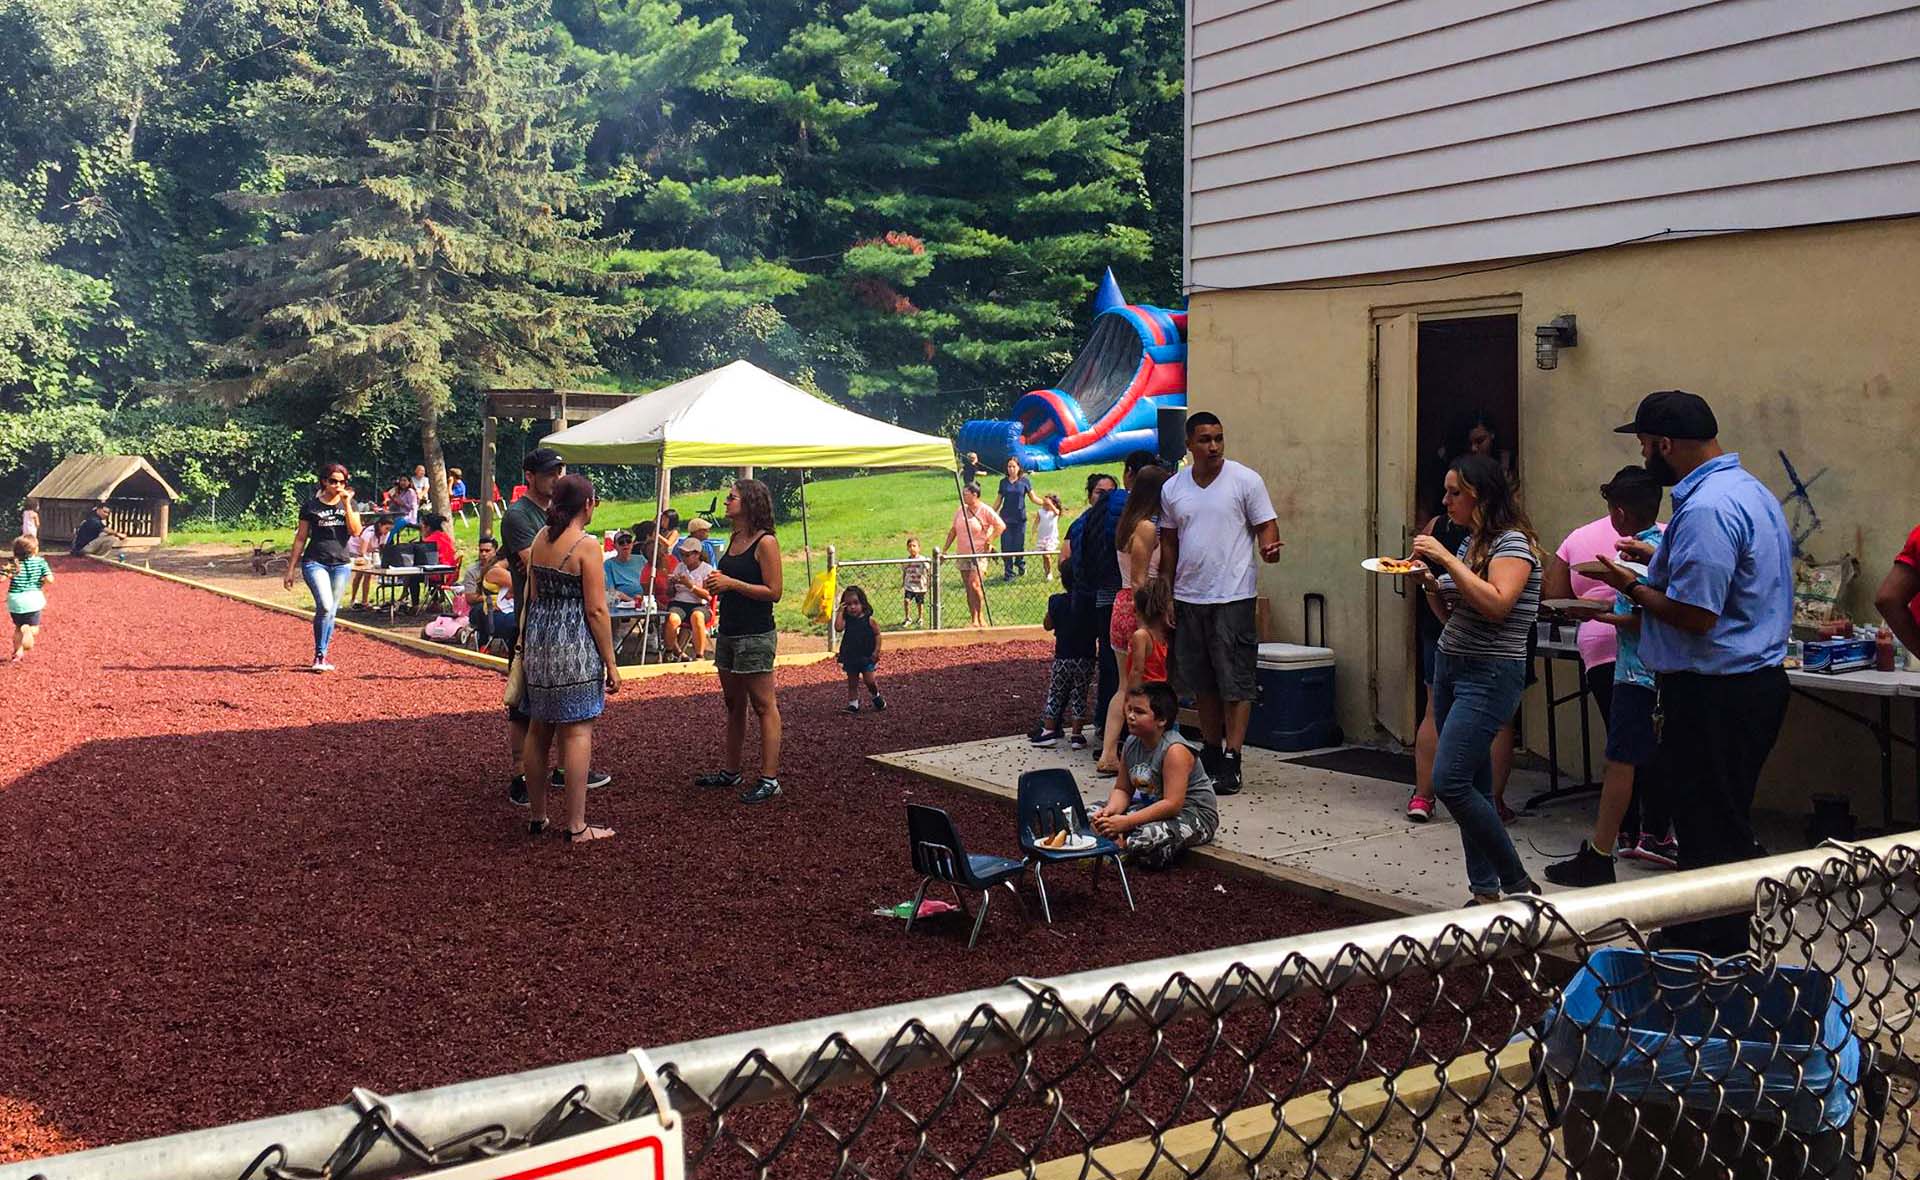 Families Picnic in the yard with Bounce House and Tent